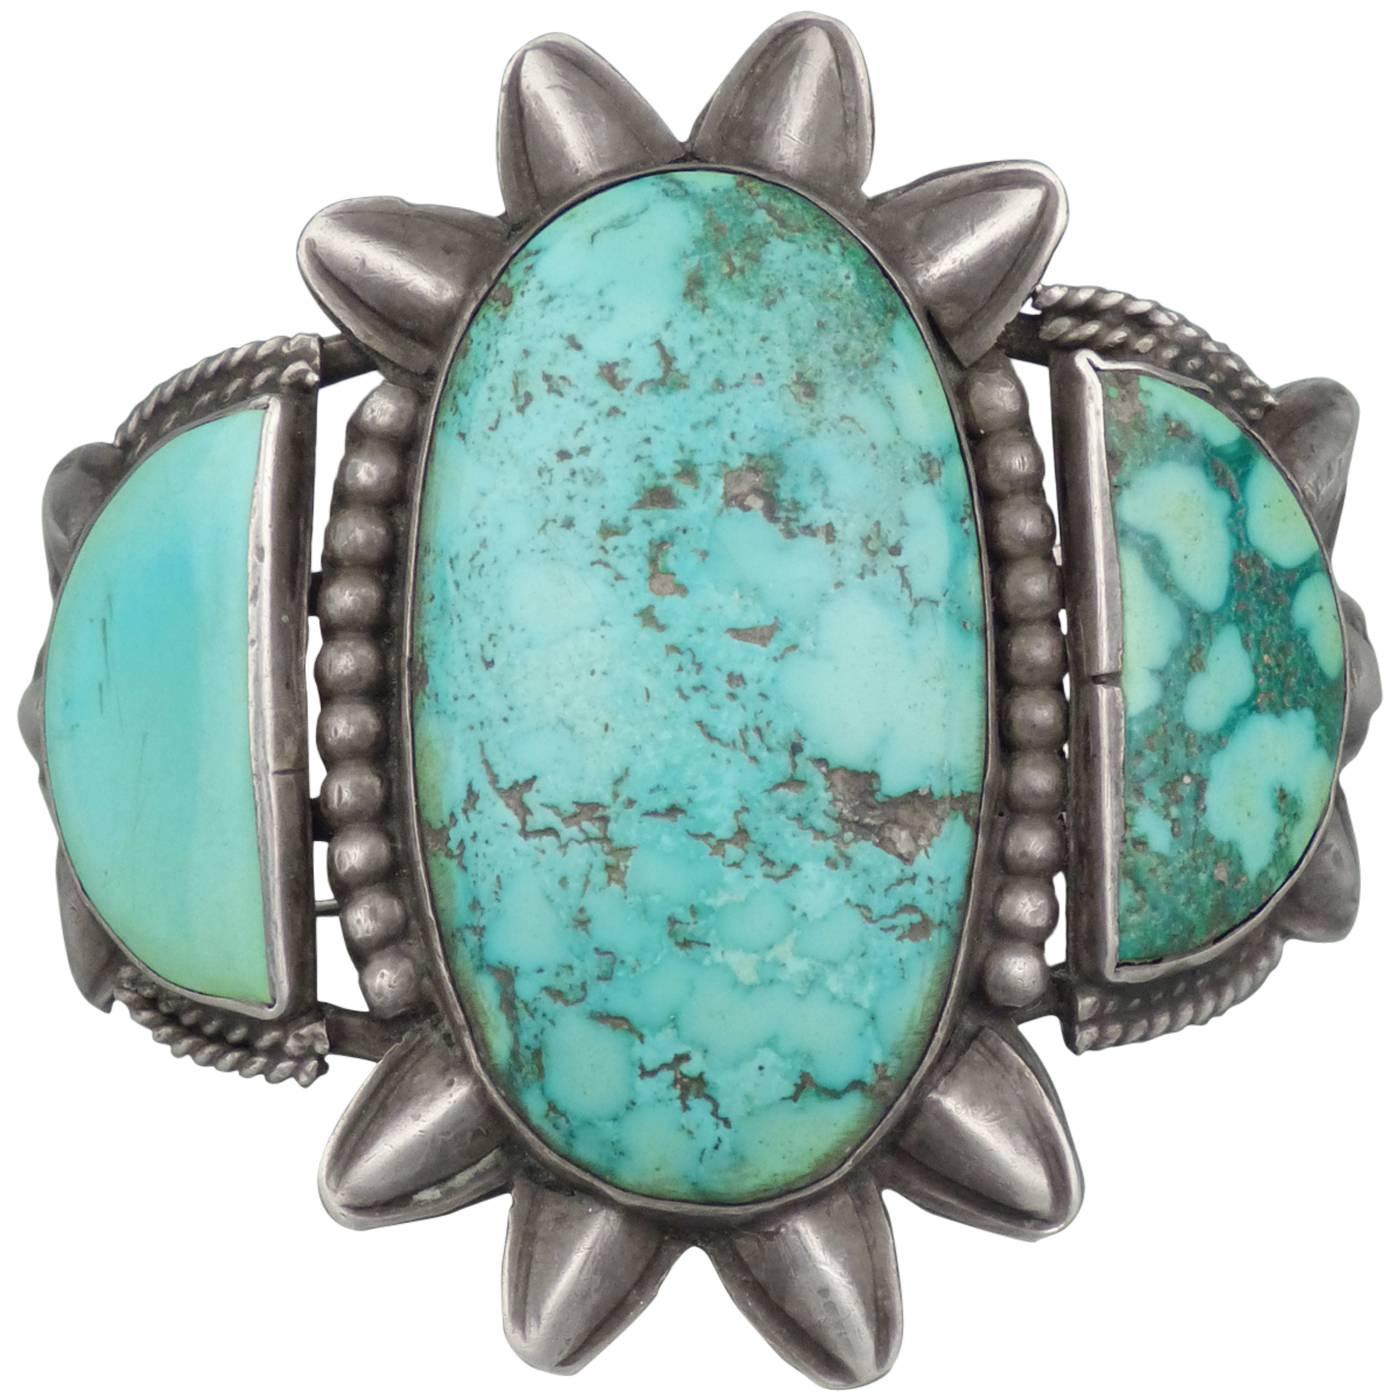 Vintage Silver and Turquoise Cuff, circa 1930